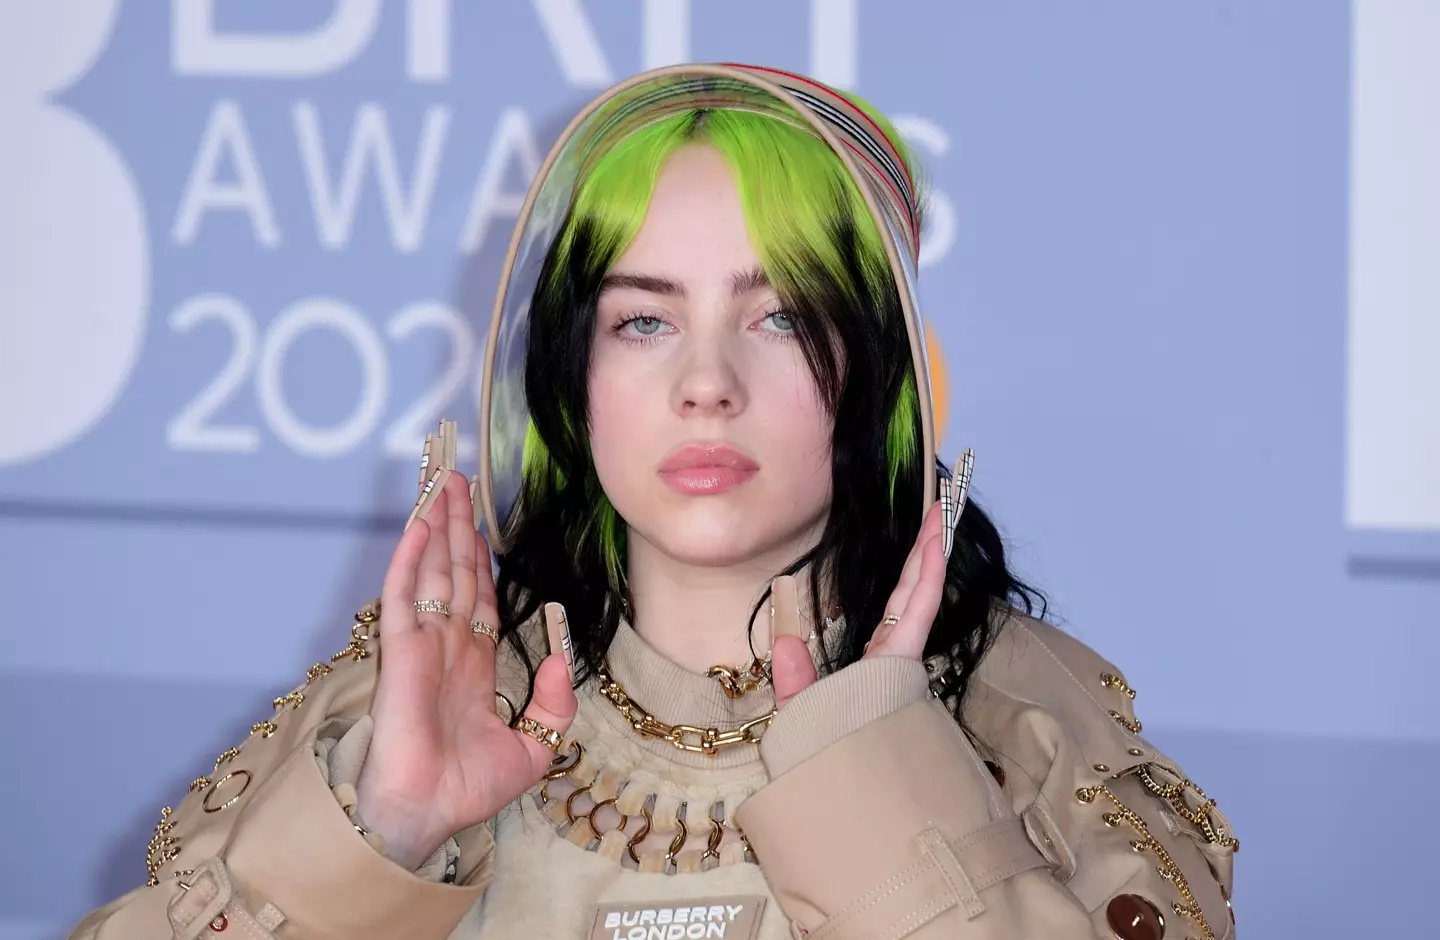 Billie Eilish is a huge fan of The Office, though it did give her the wrong idea about where U2 were from.